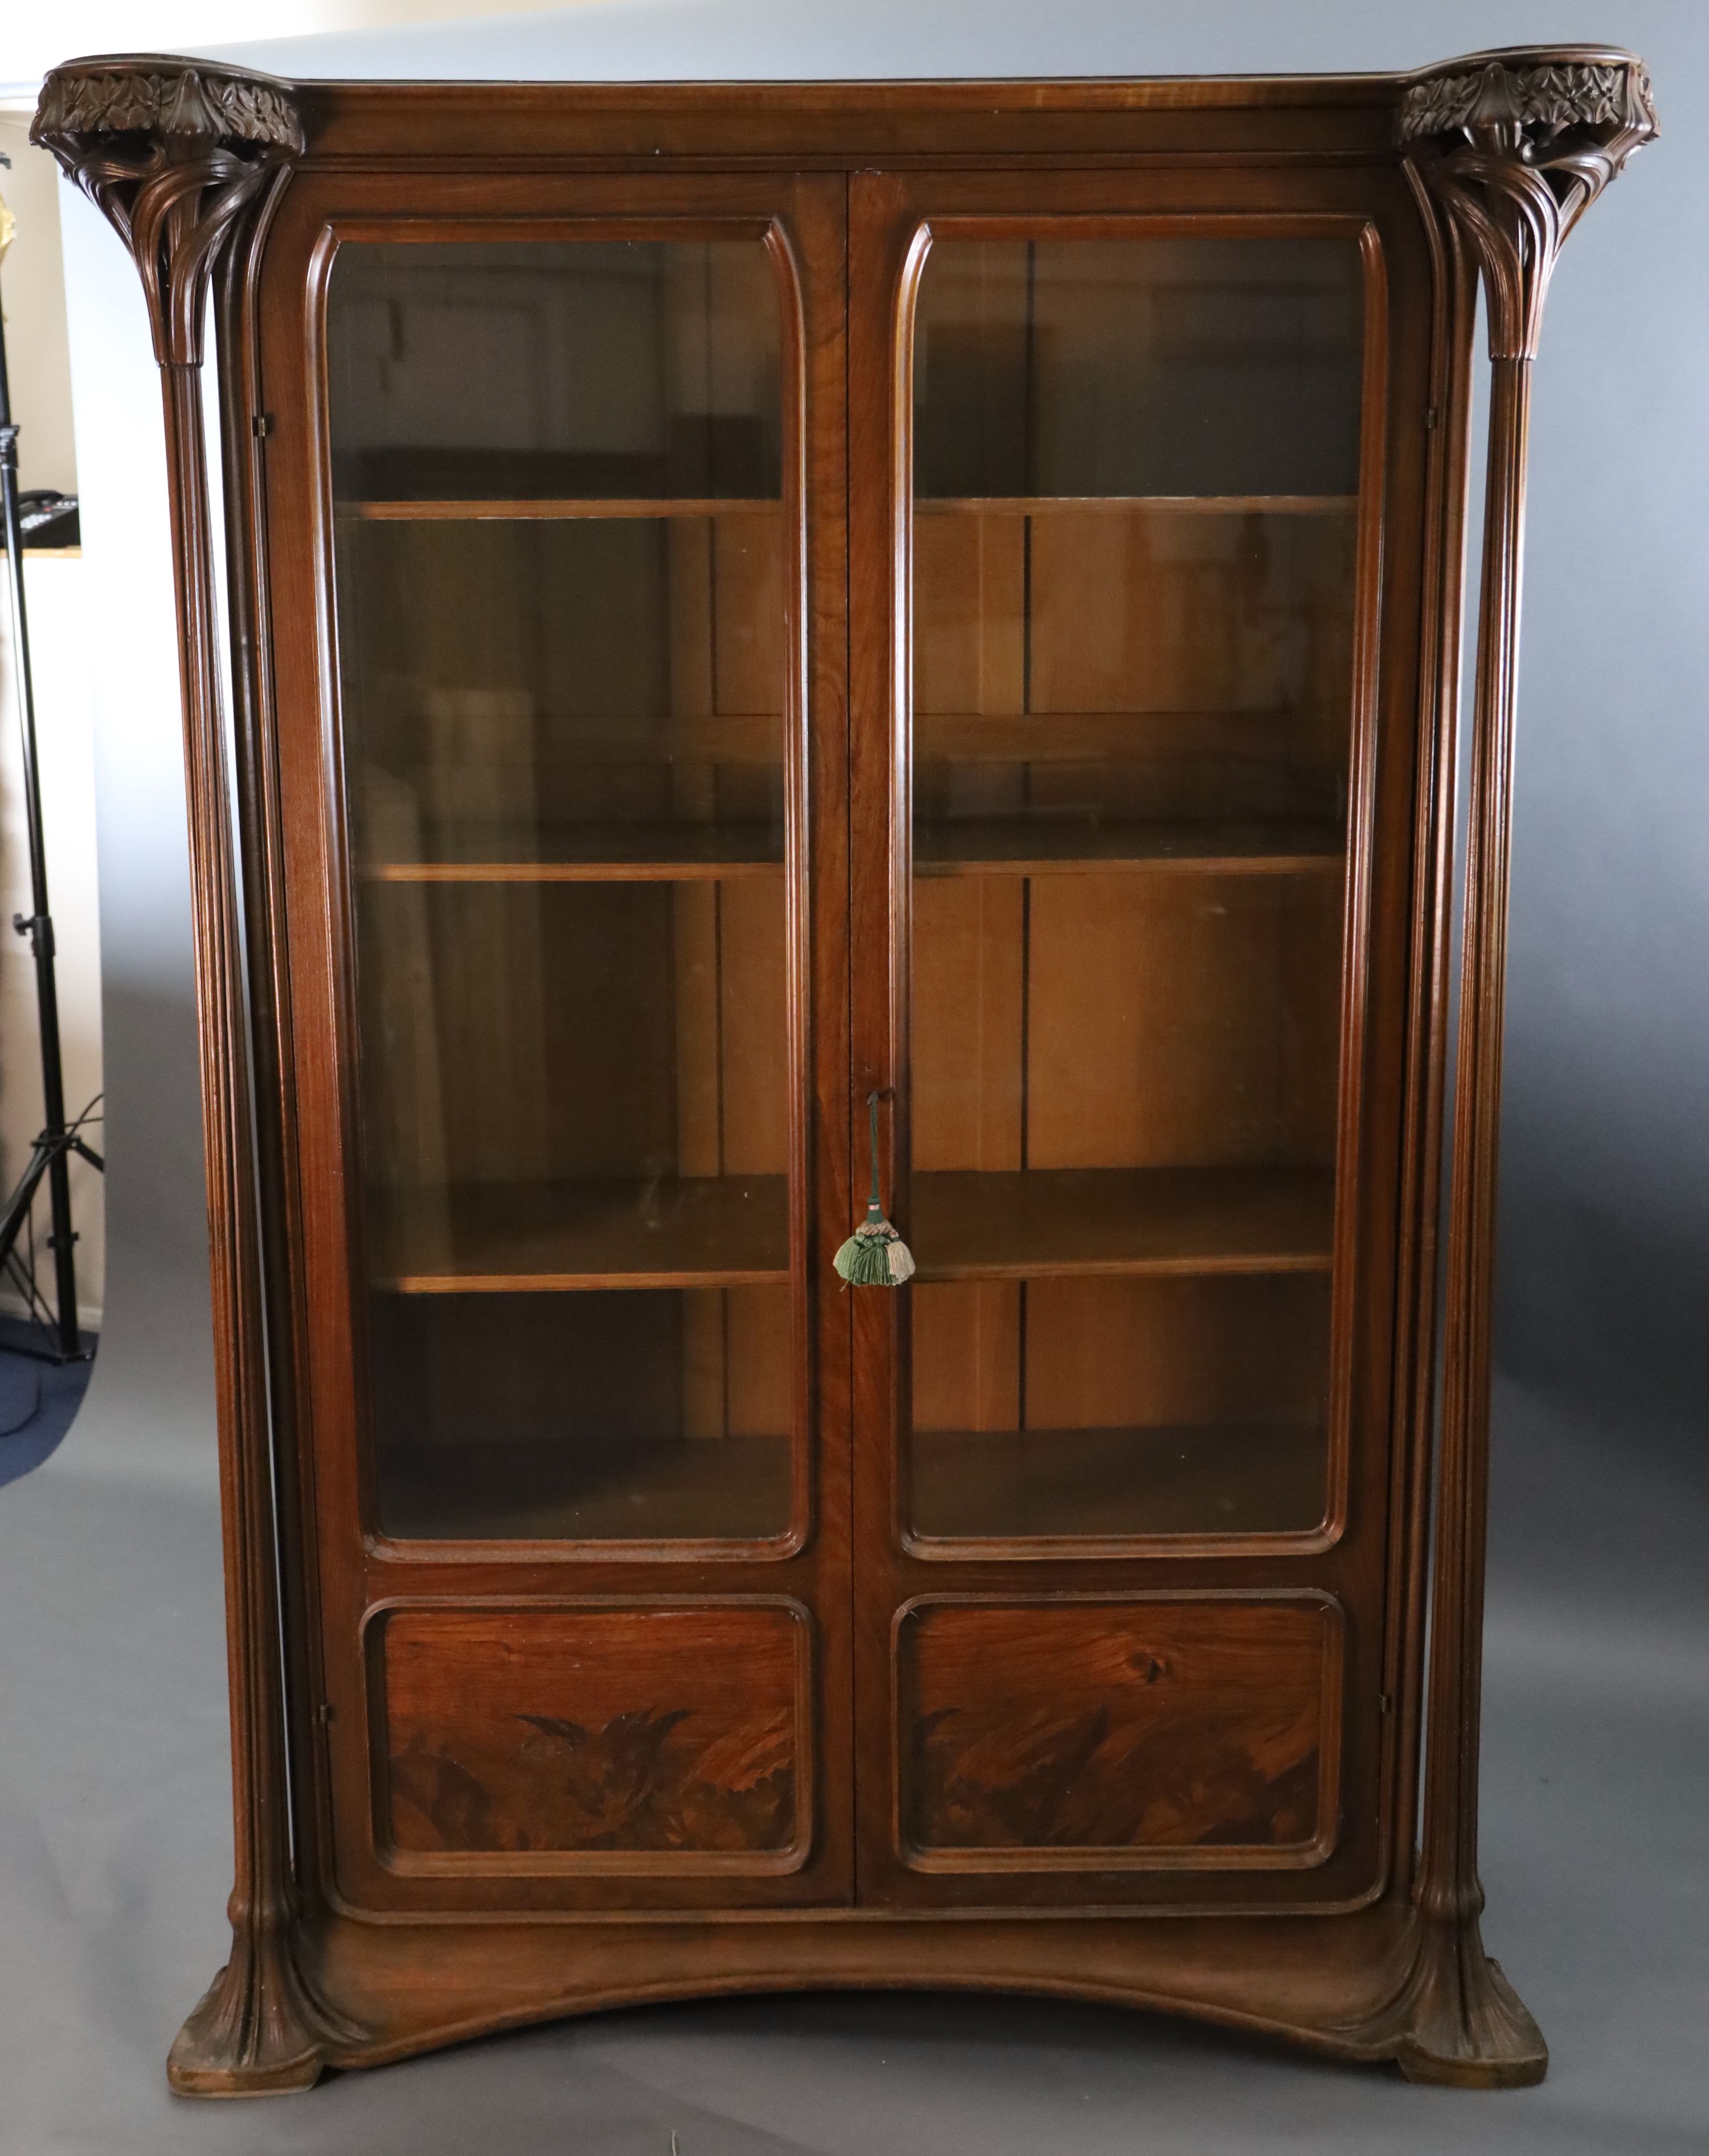 An Art Nouveau walnut and marquetry vitrine by Majorelle, W.5ft D.1ft 10in. H.6ft 7in.